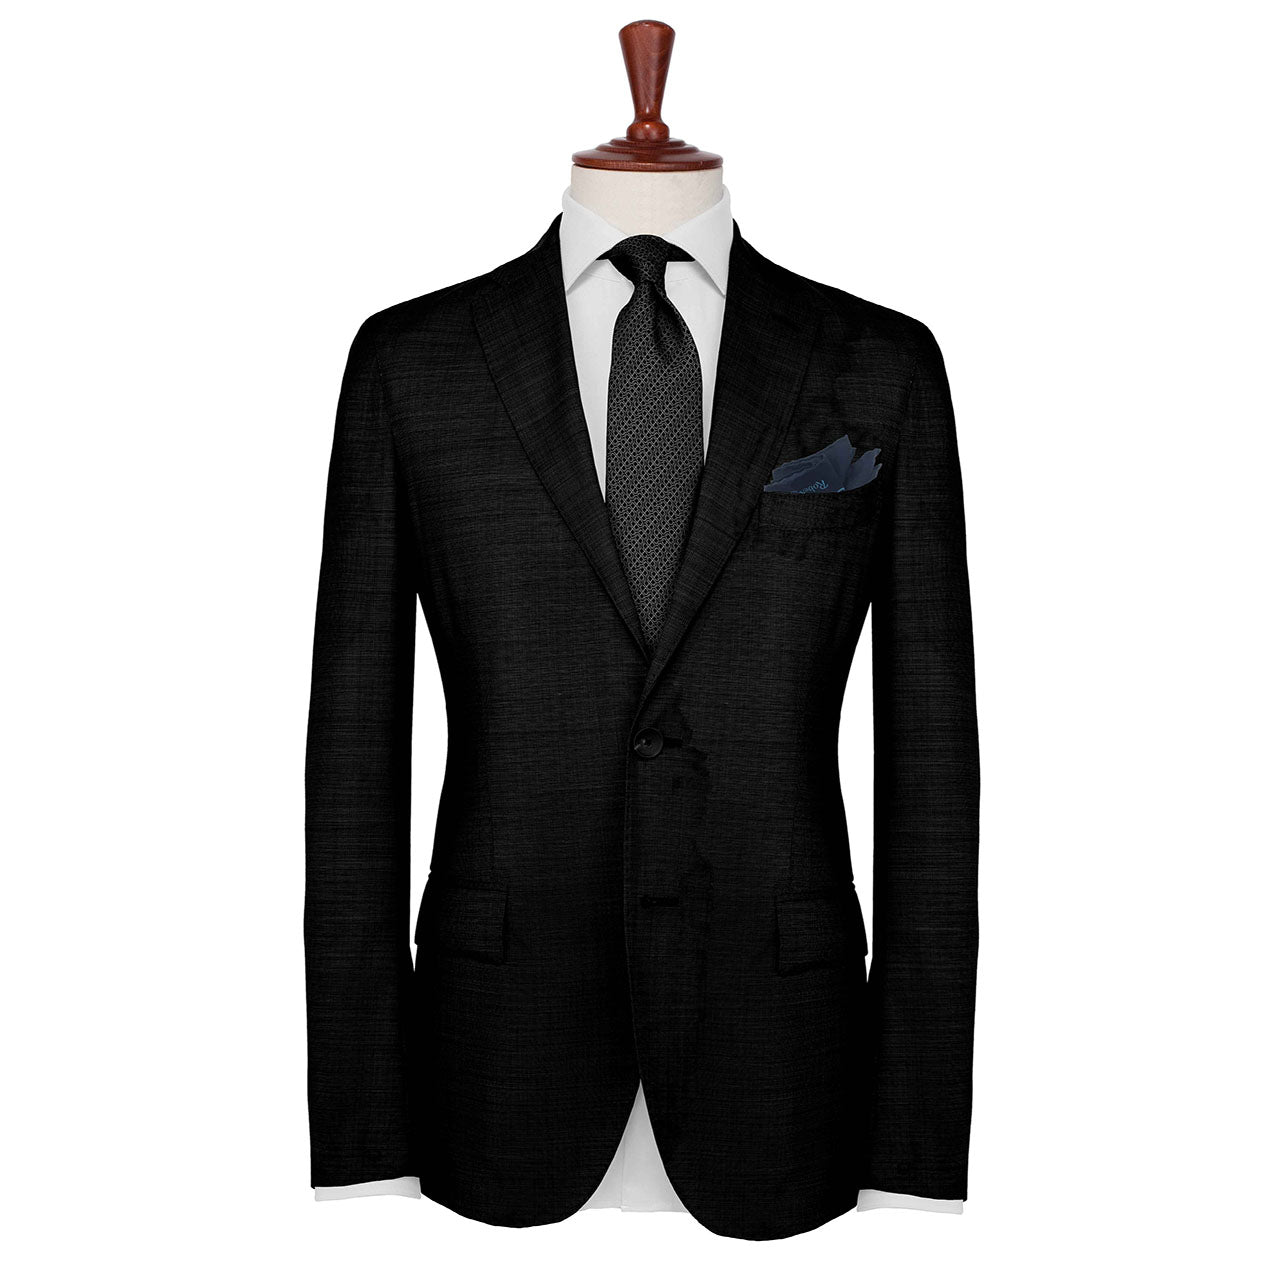 The Code Charcoal Pocket Square